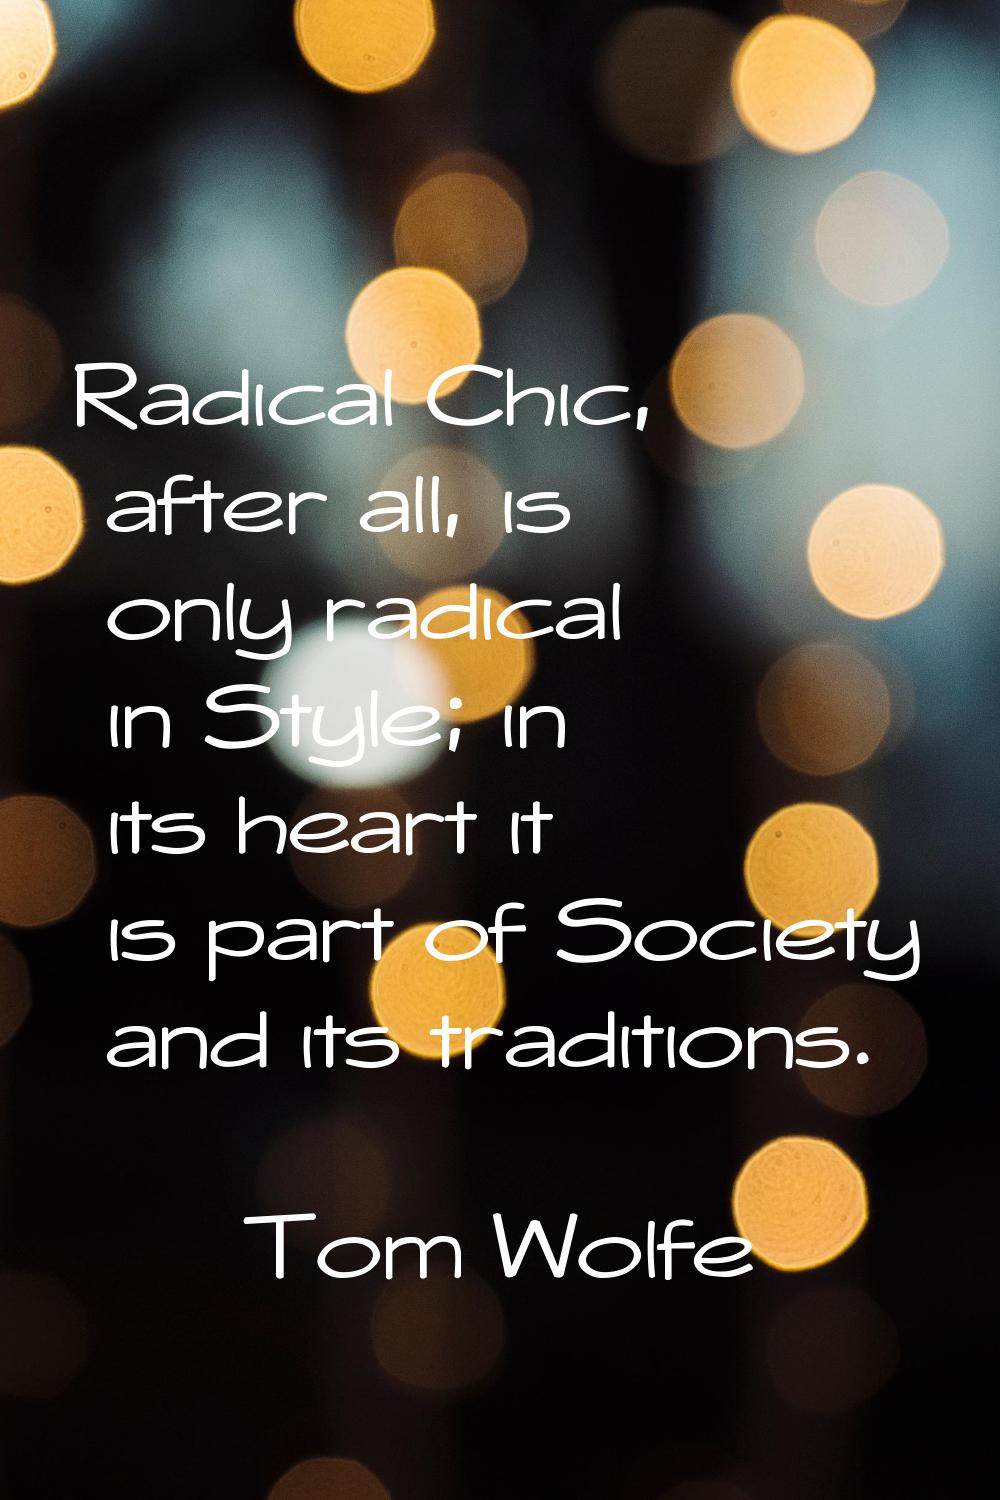 Radical Chic, after all, is only radical in Style; in its heart it is part of Society and its tradi